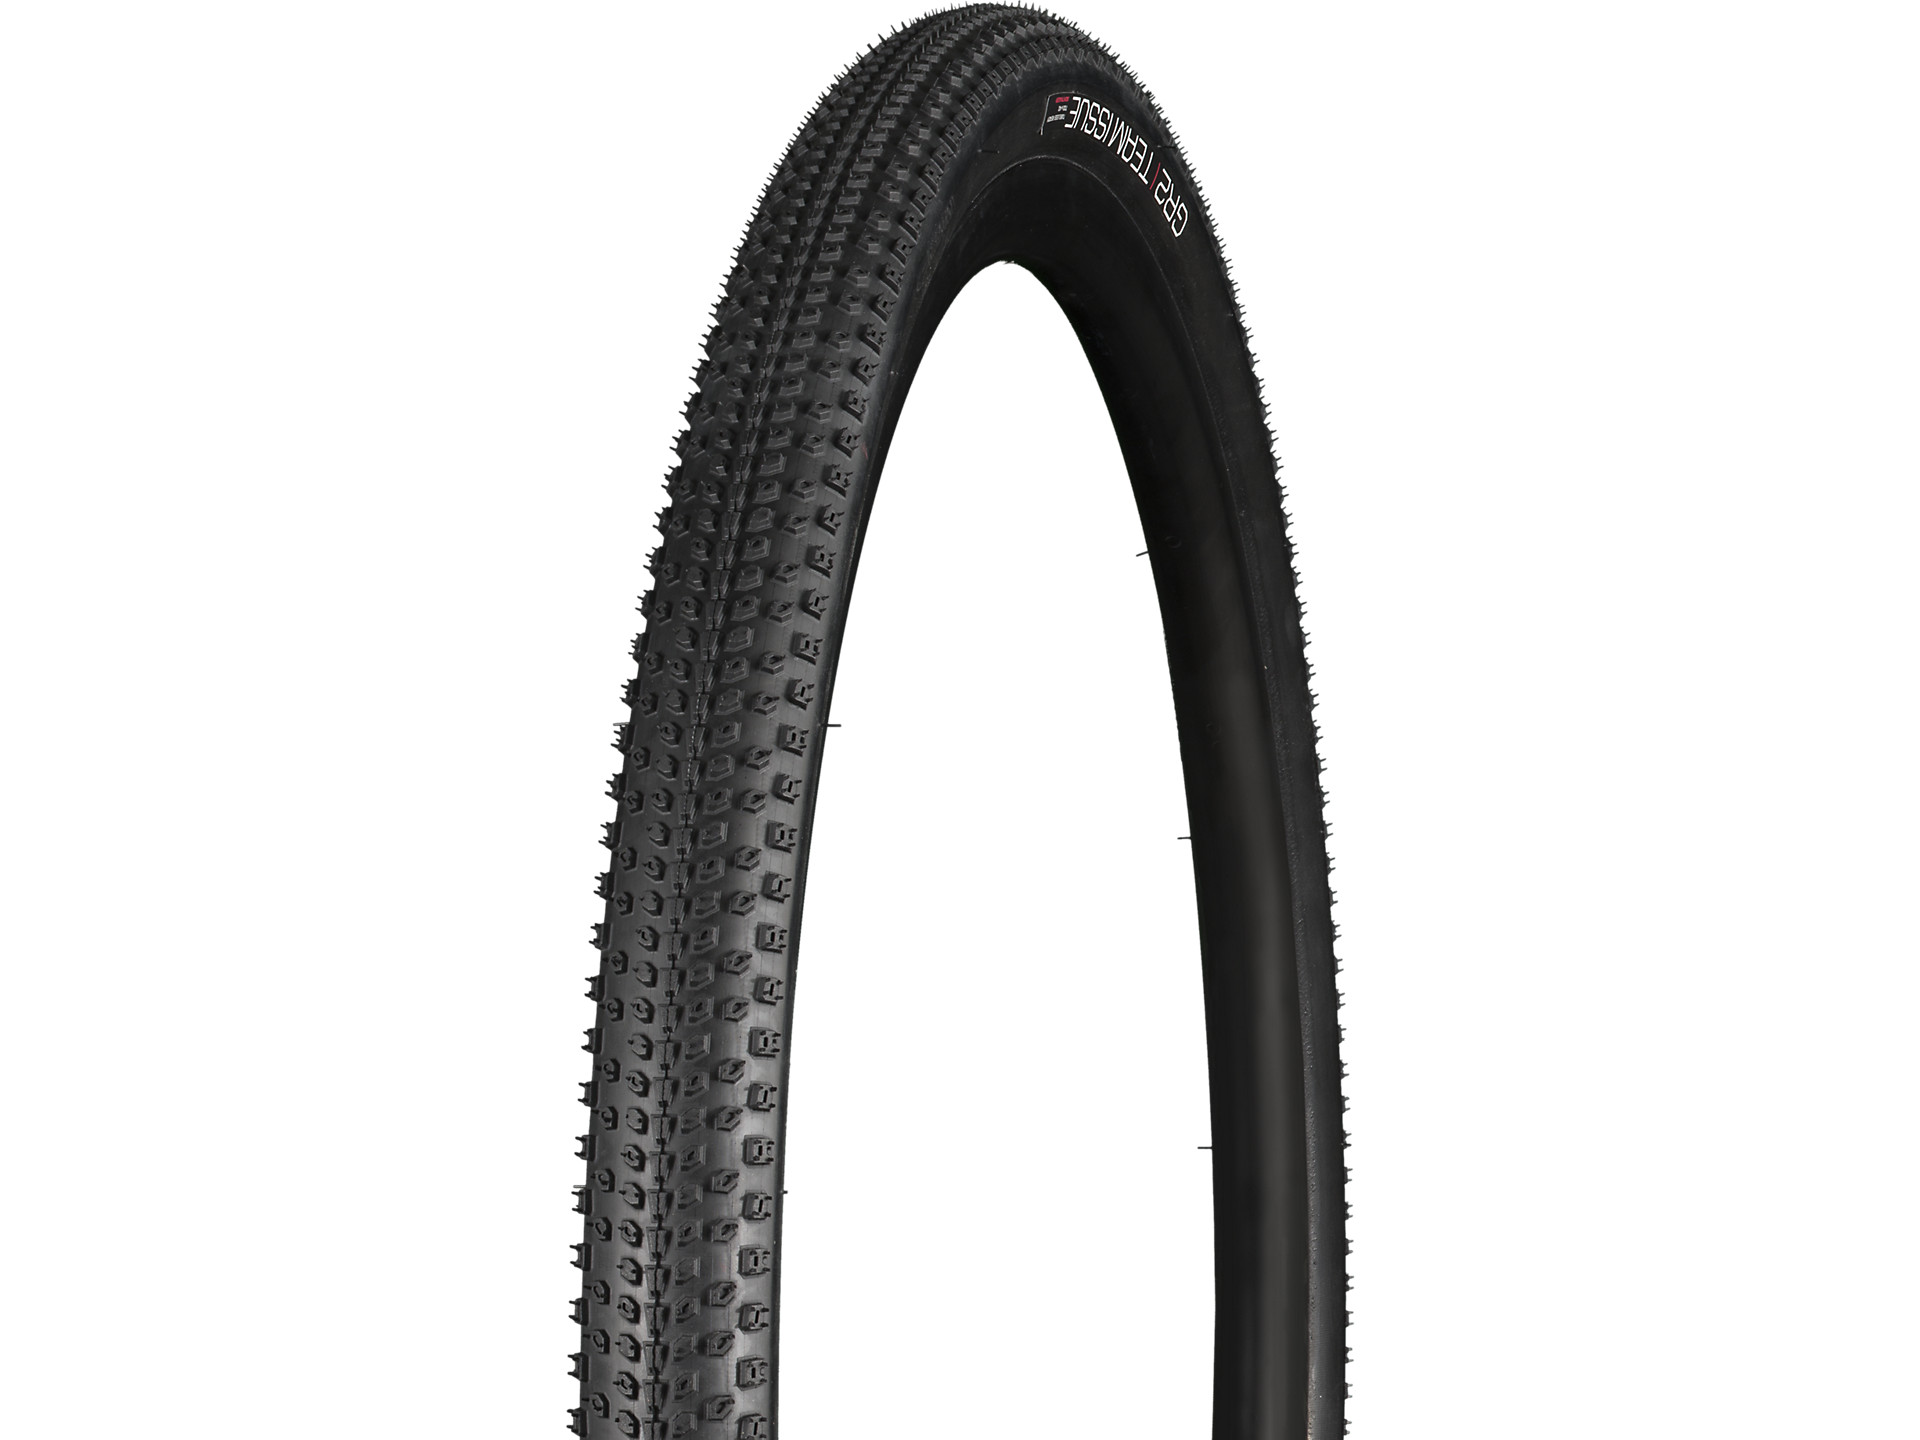 1 or 2 Tire Continental Cyclocross Race 700 x 35C Clincher Bike Tire Gravel 